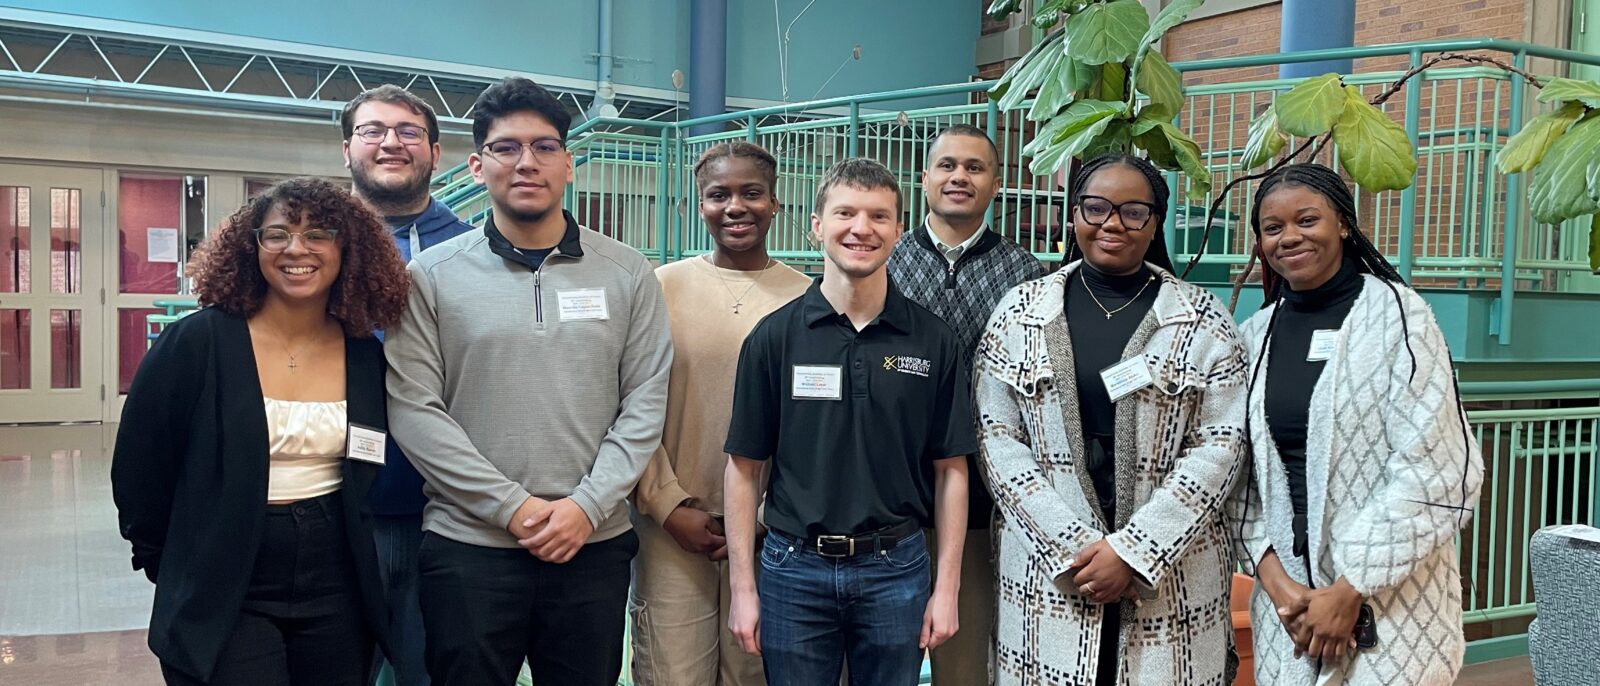 HU students take home awards at PA Academy of Science meeting